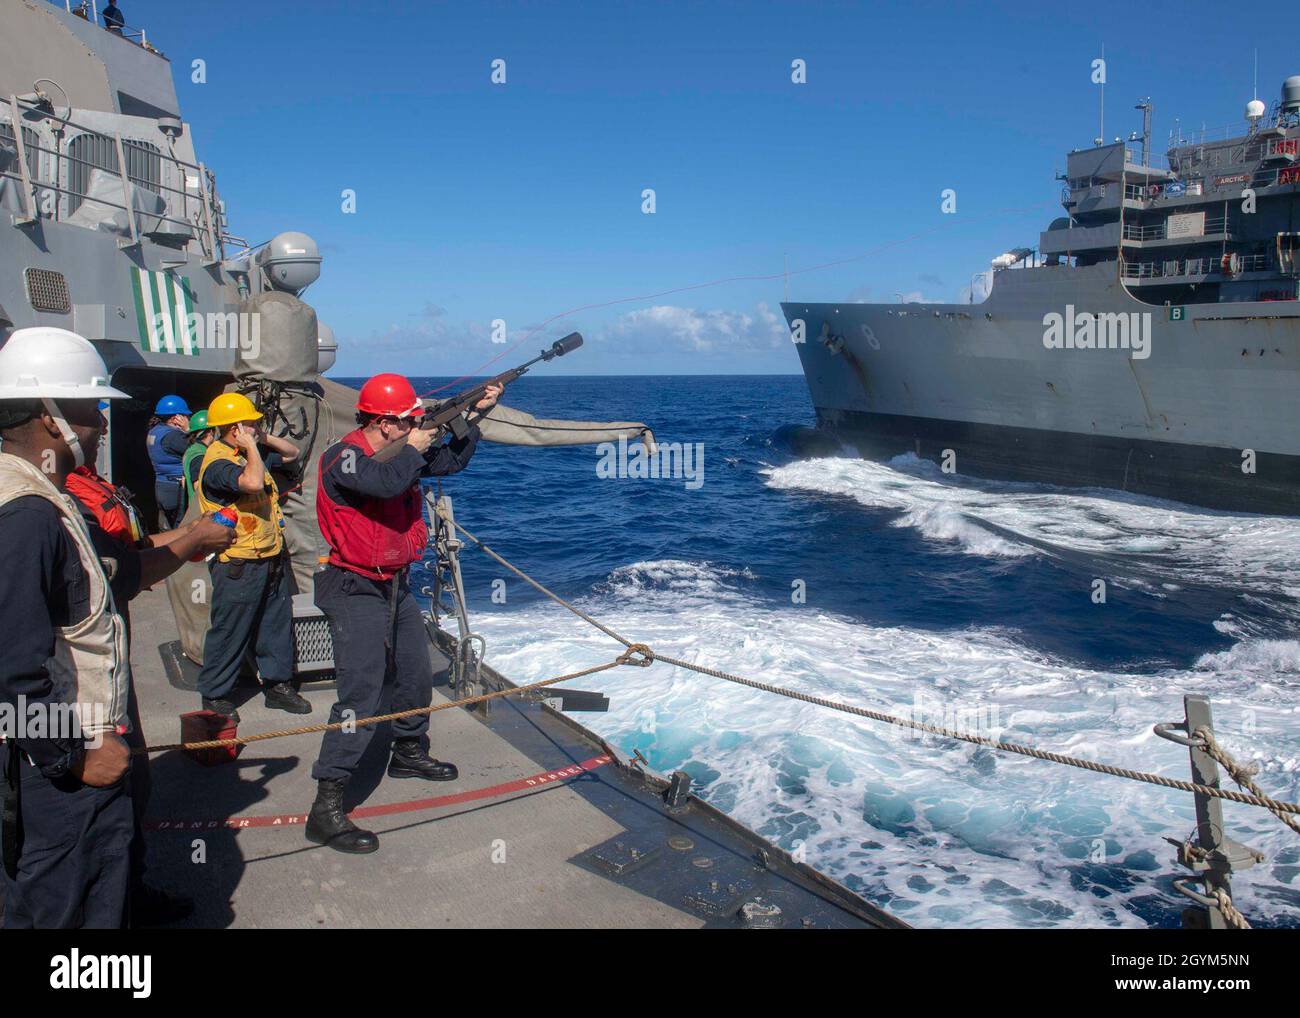 PACIFIC OCEAN (Jan. 27, 2020) Gunner’s Mate 3rd Class Joshua Davis, from Pensacola, Fla., fires a shot line from aboard the Arleigh Burke-class guided-missile destroyer USS Paul Hamilton (DDG 60) to the Military Sealift Command fast combat support ship USNS Arctic (T-AO 8) during a replenishment-at-sea Jan. 27, 2020. Paul Hamilton, part of the Theodore Roosevelt Carrier Strike Group, is on a scheduled deployment to the Indo-Pacific. (U.S. Navy photo by Mass Communication Specialist 3rd Class Matthew F. Jackson) Stock Photo